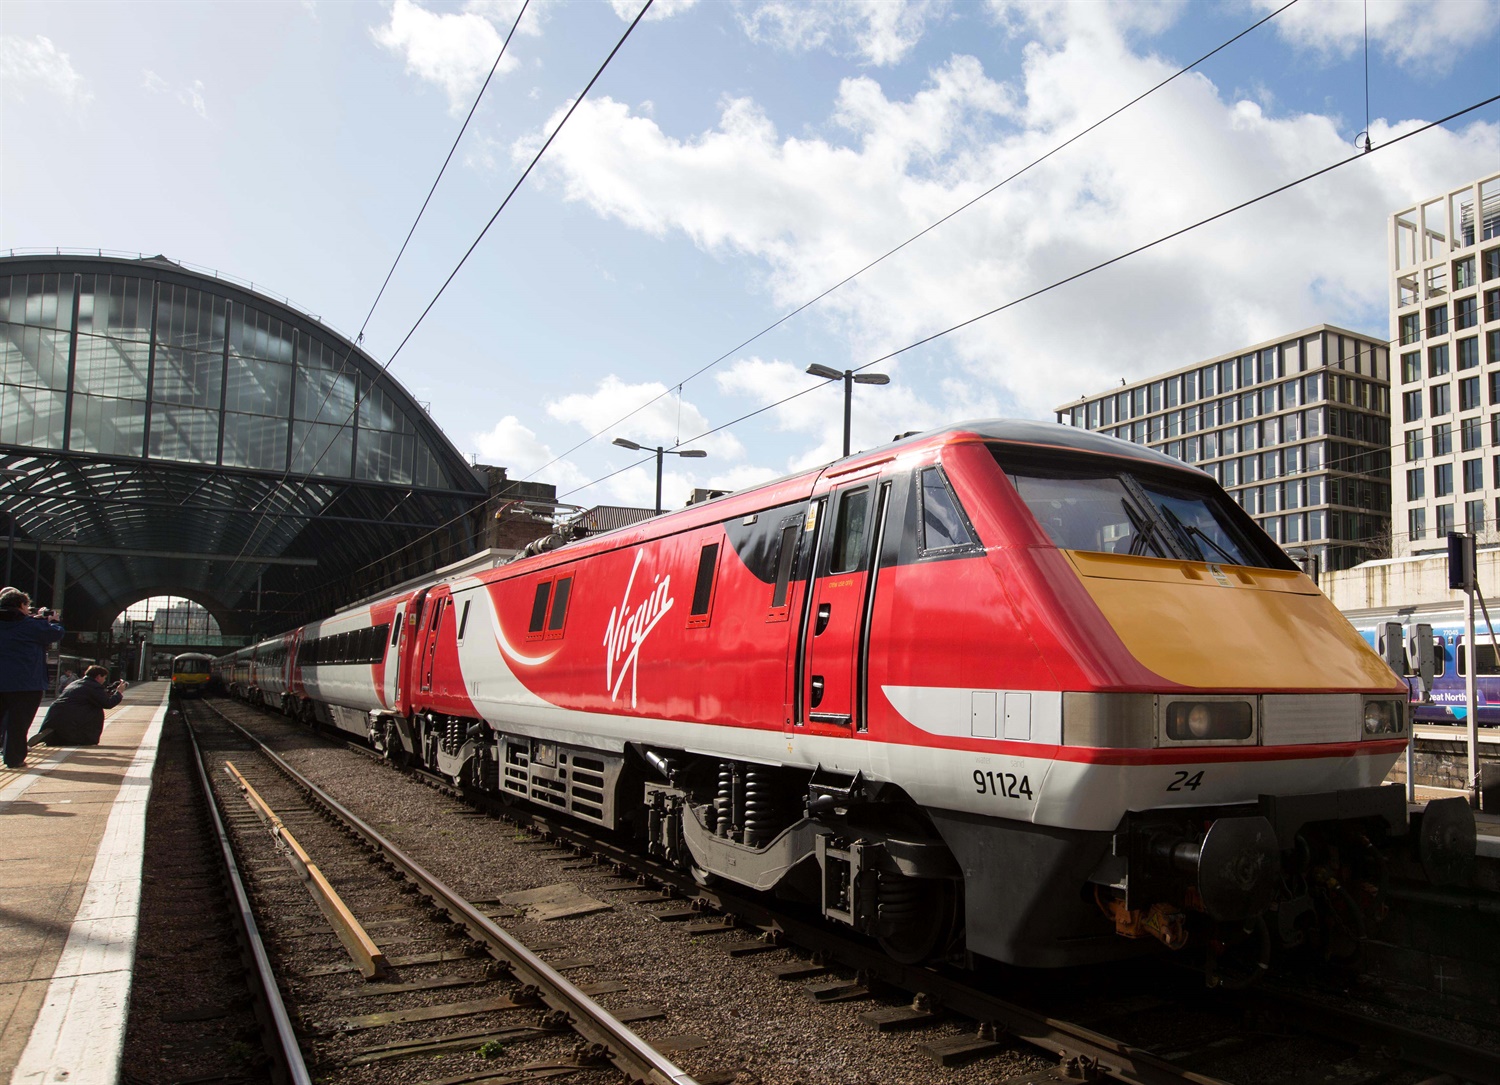 Government could face investigation over Virgin East Coast ‘bailout’